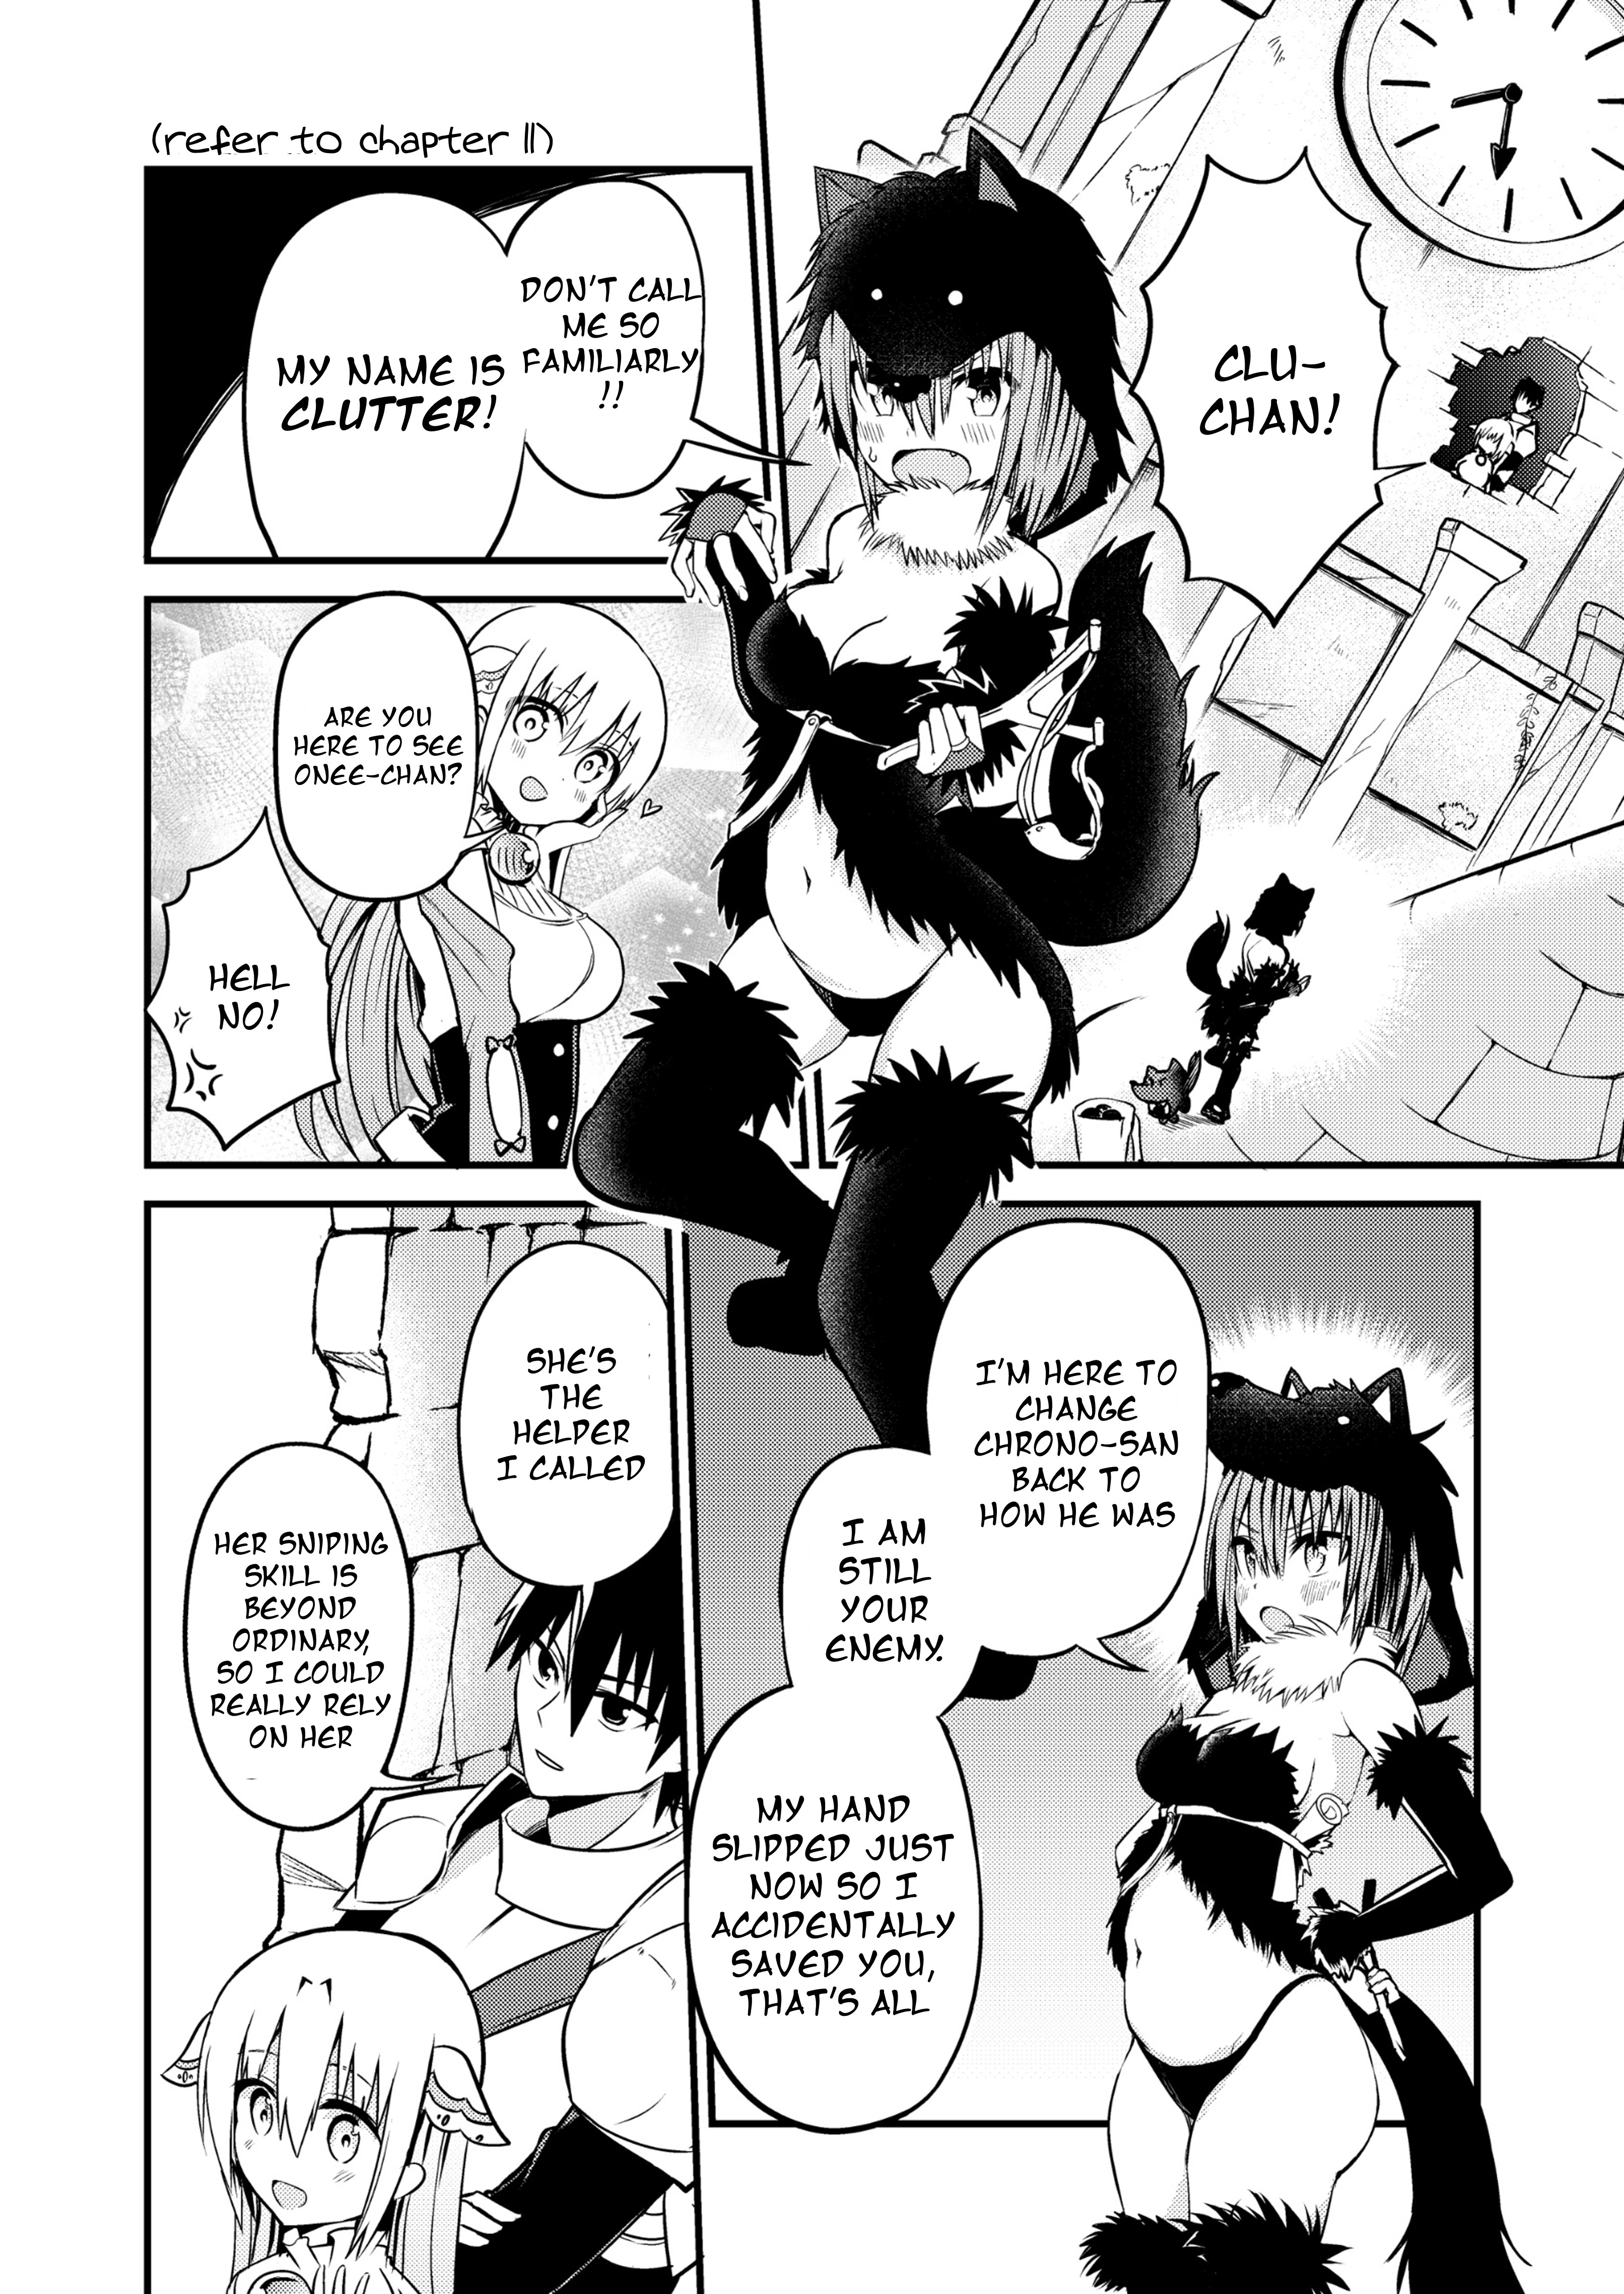 Shiro Madoushi Syrup-San Vol.1 Chapter 19: White Mage Syrup-San And The Helper - Picture 2